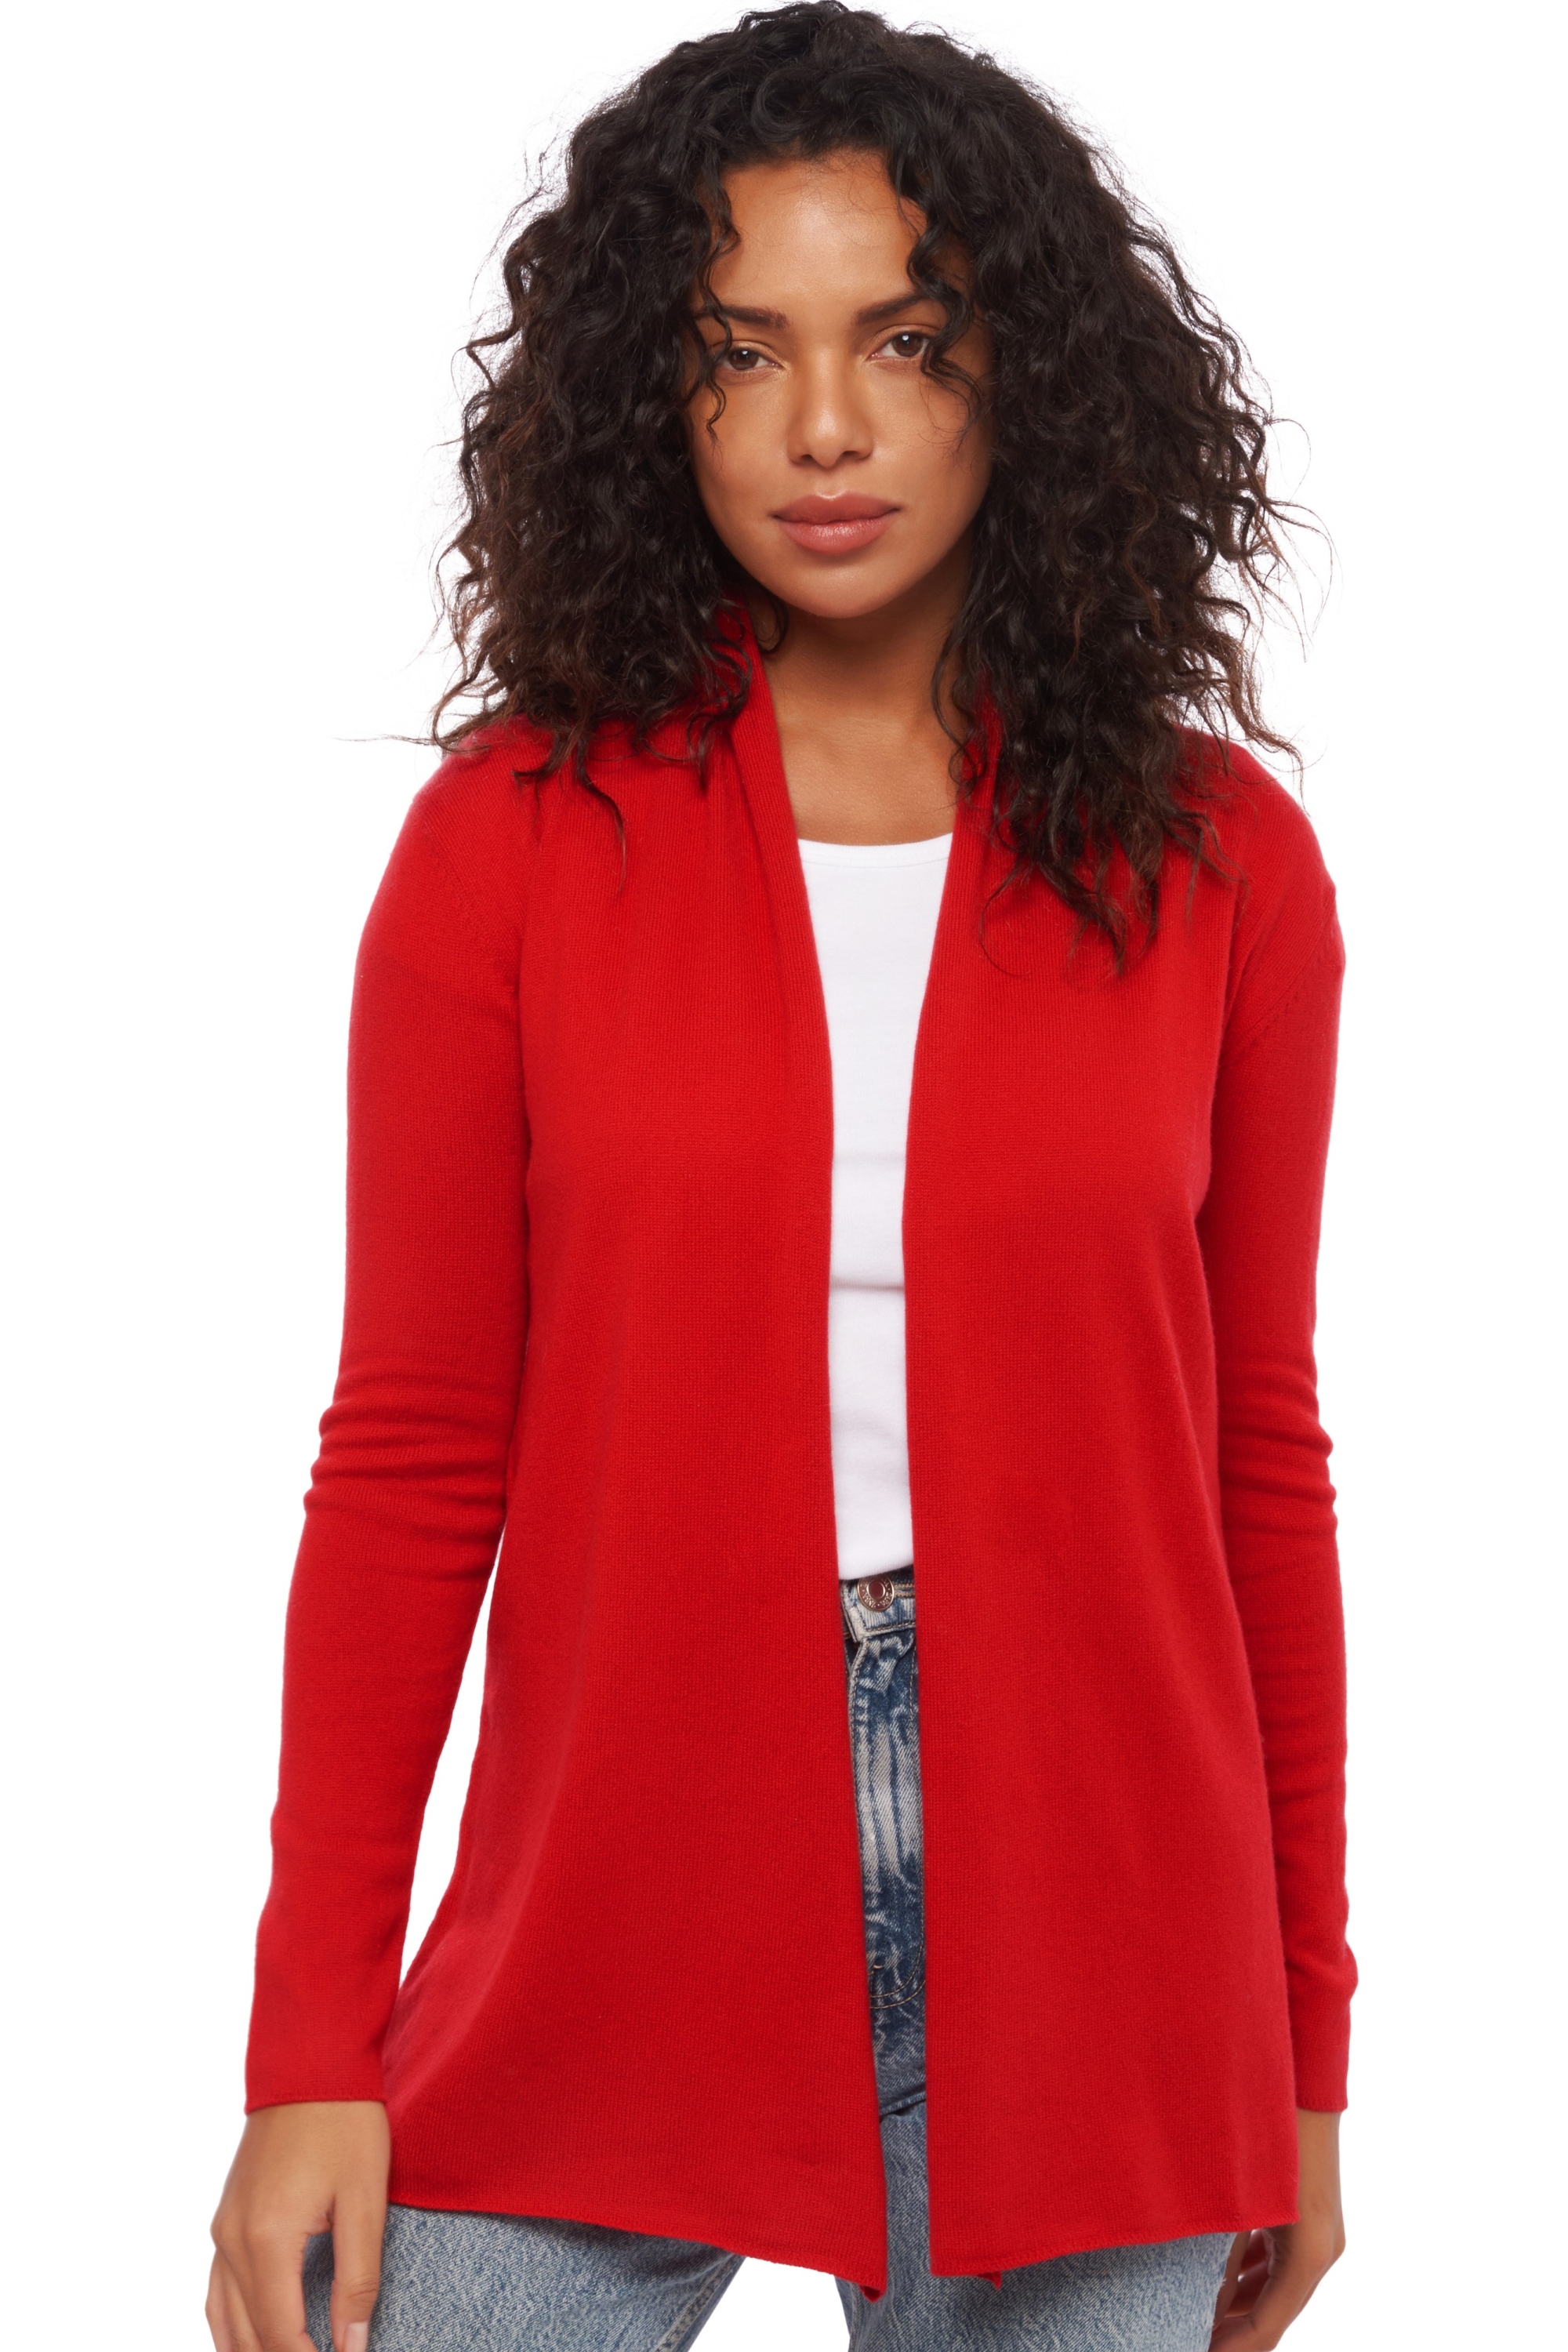 Cachemire pull femme pucci rouge velours xs